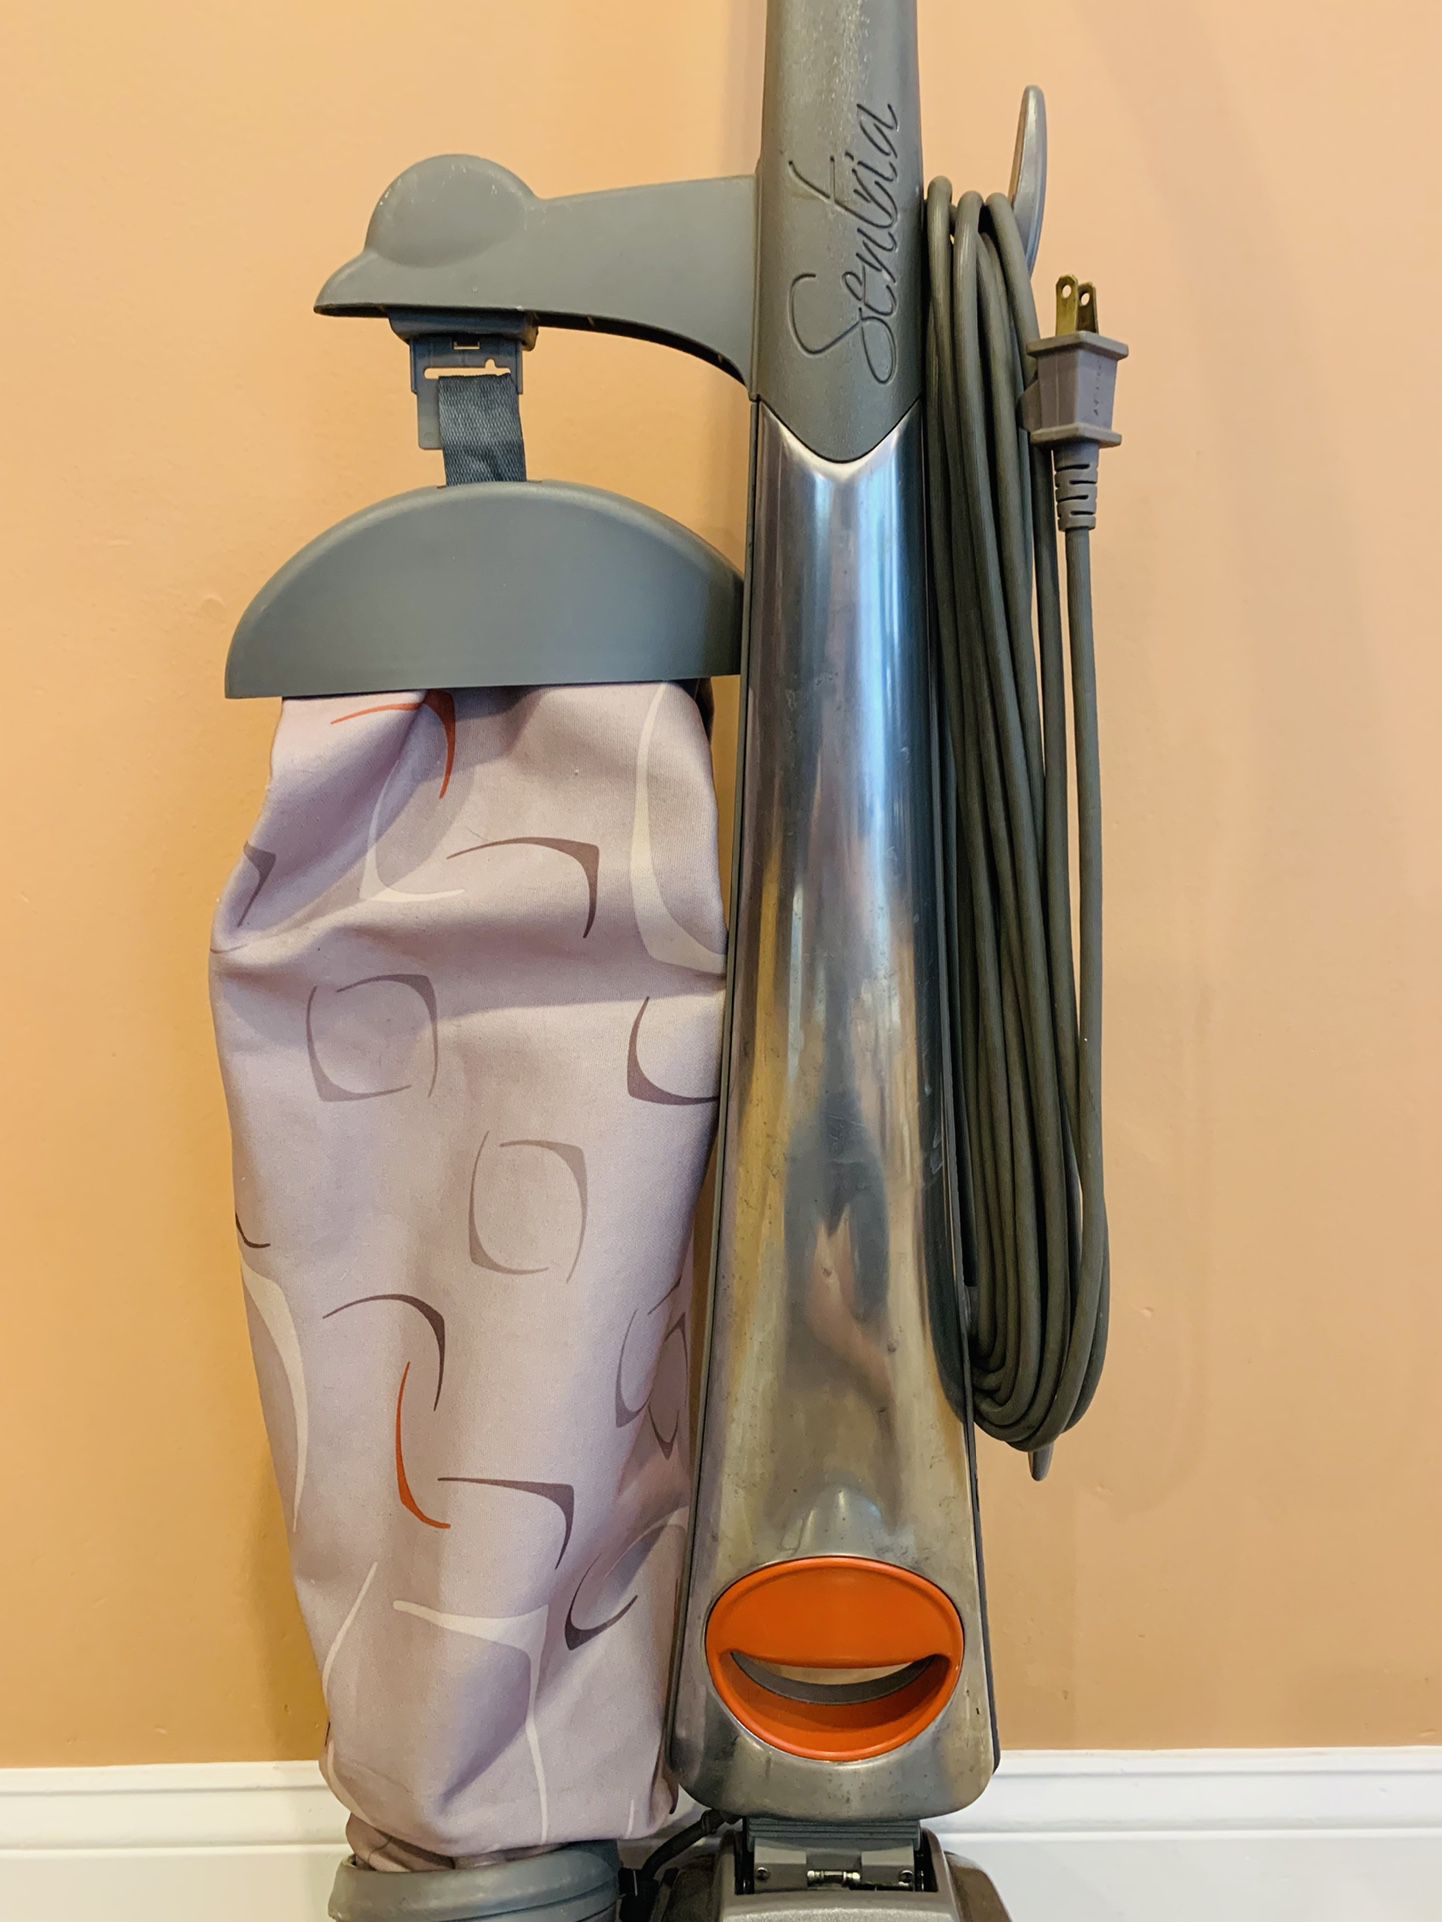 Kirby Sentria vacuum cleaner with attachments